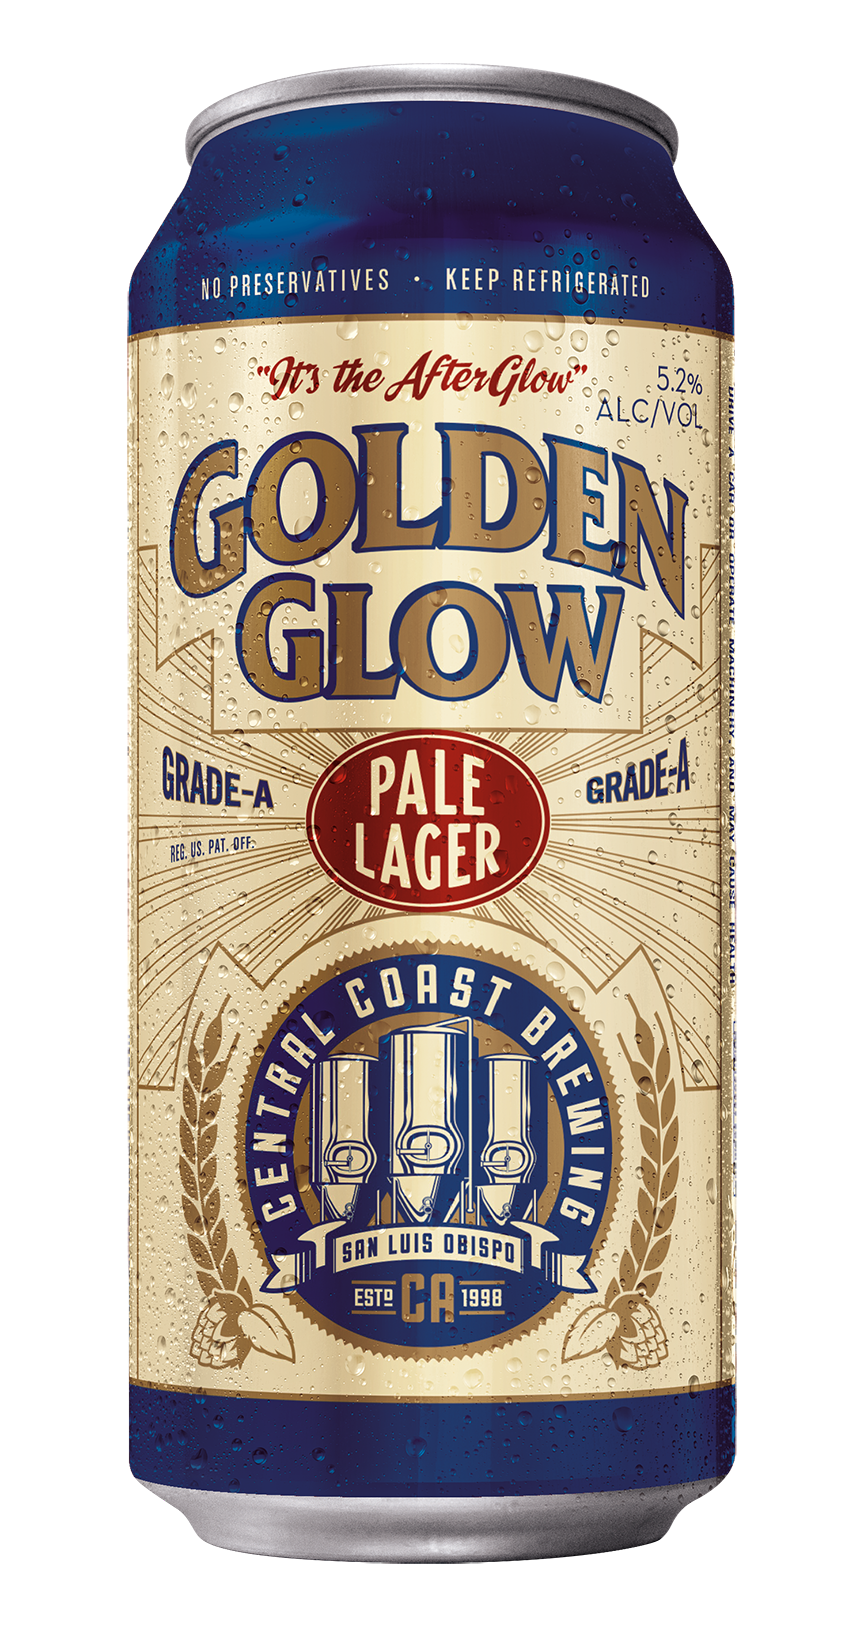 Golden Glow 12-Pack Cans (12-16 oz can)